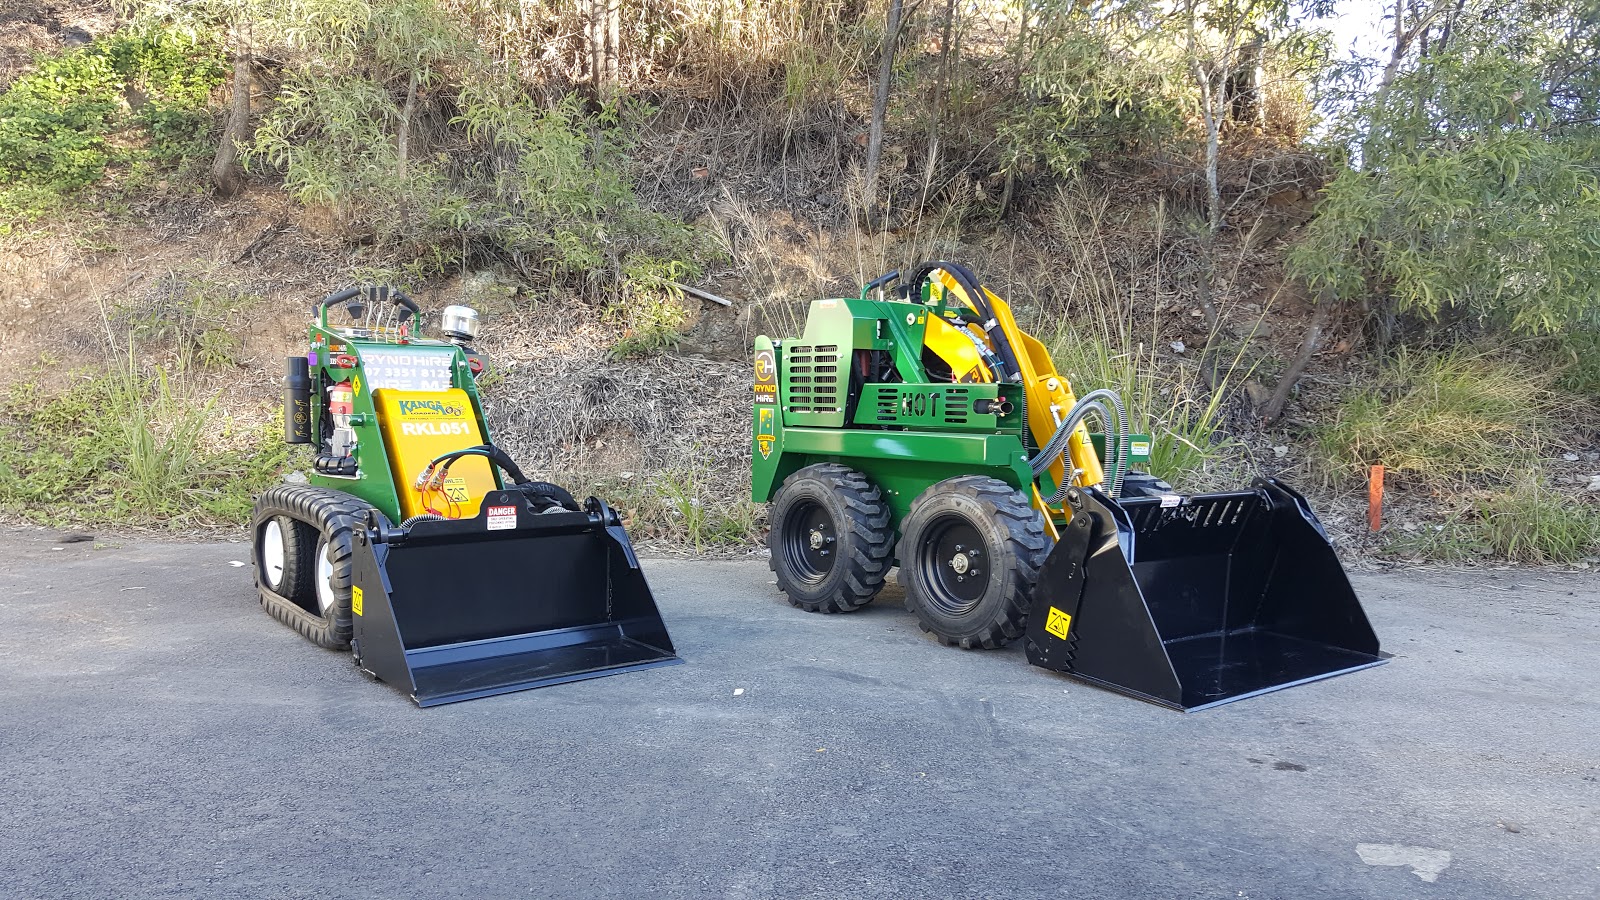 Two sizes of micro loaders